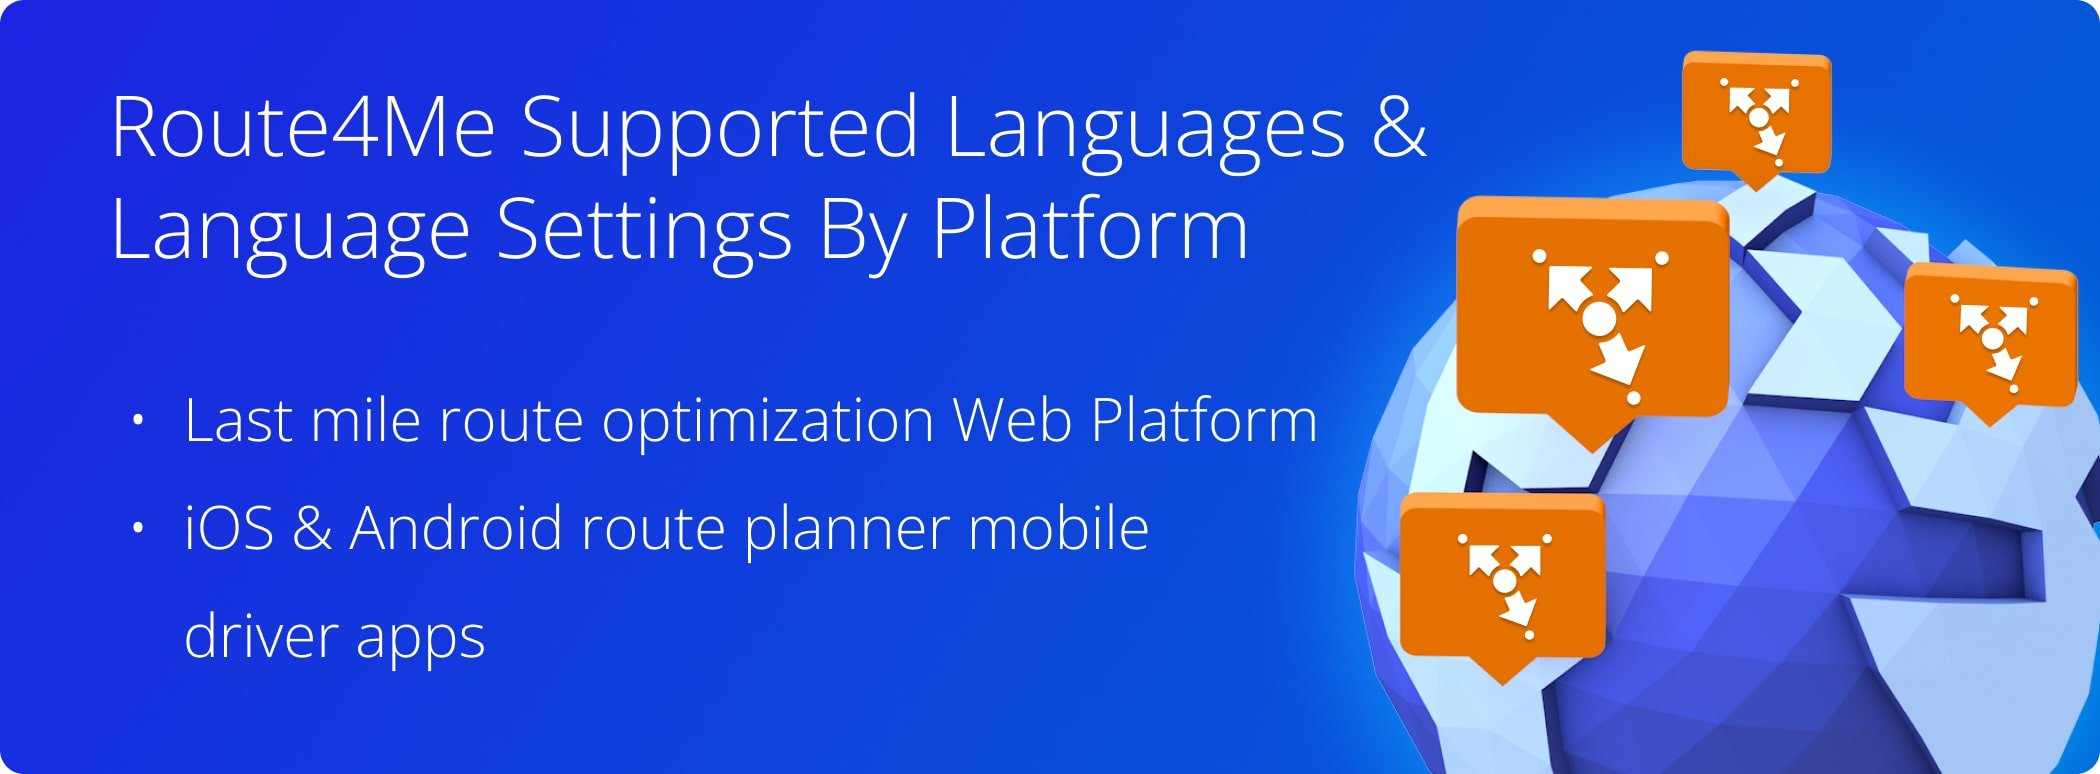 Route4Me Supported Languages and Language Settings for Web Platform and iOS and Android Mobile Apps